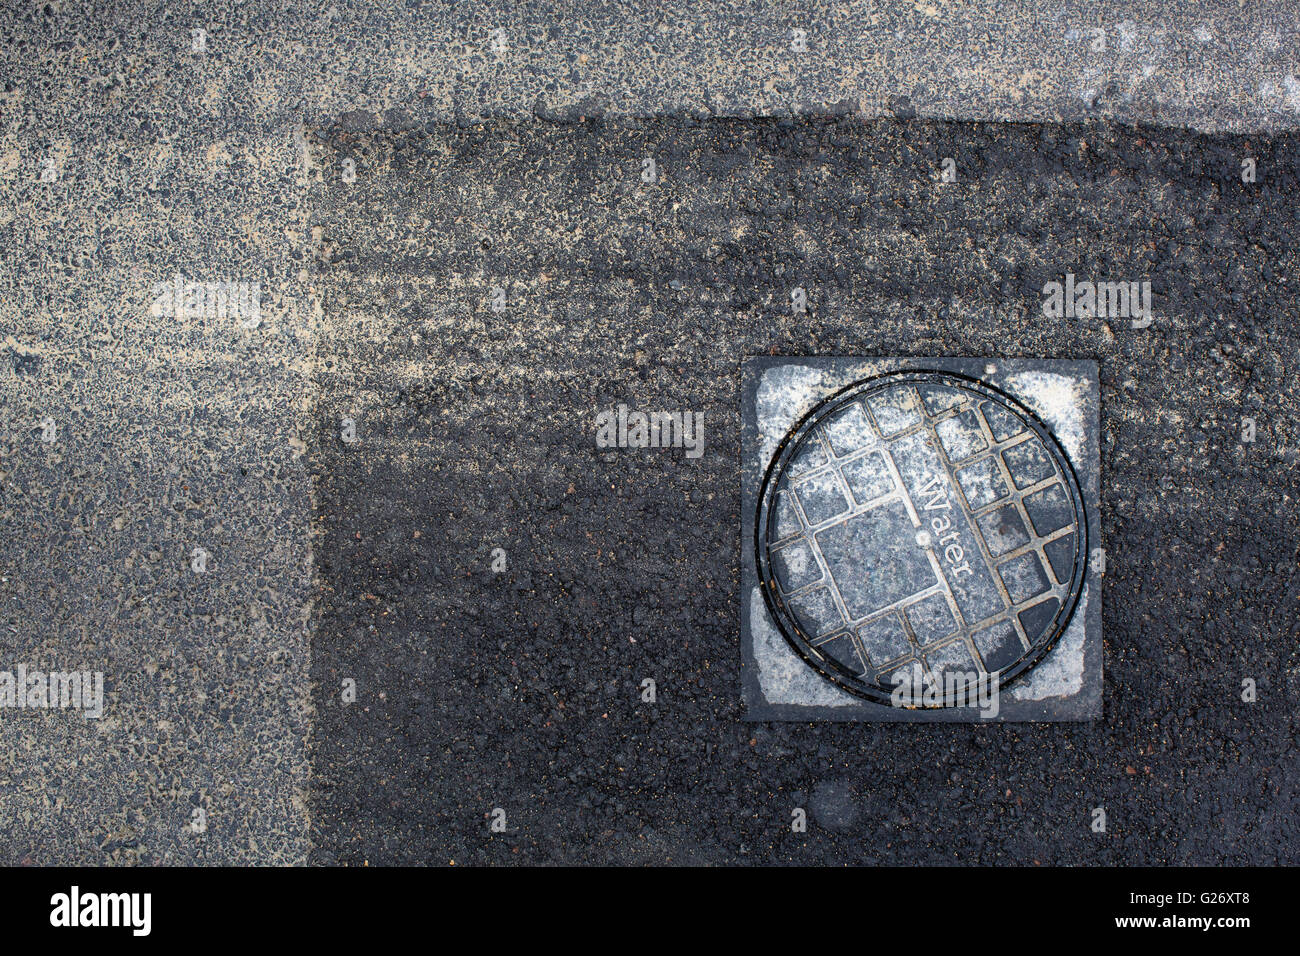 Covers set in the road hiding access to water and utilites for domestic housing. Stock Photo